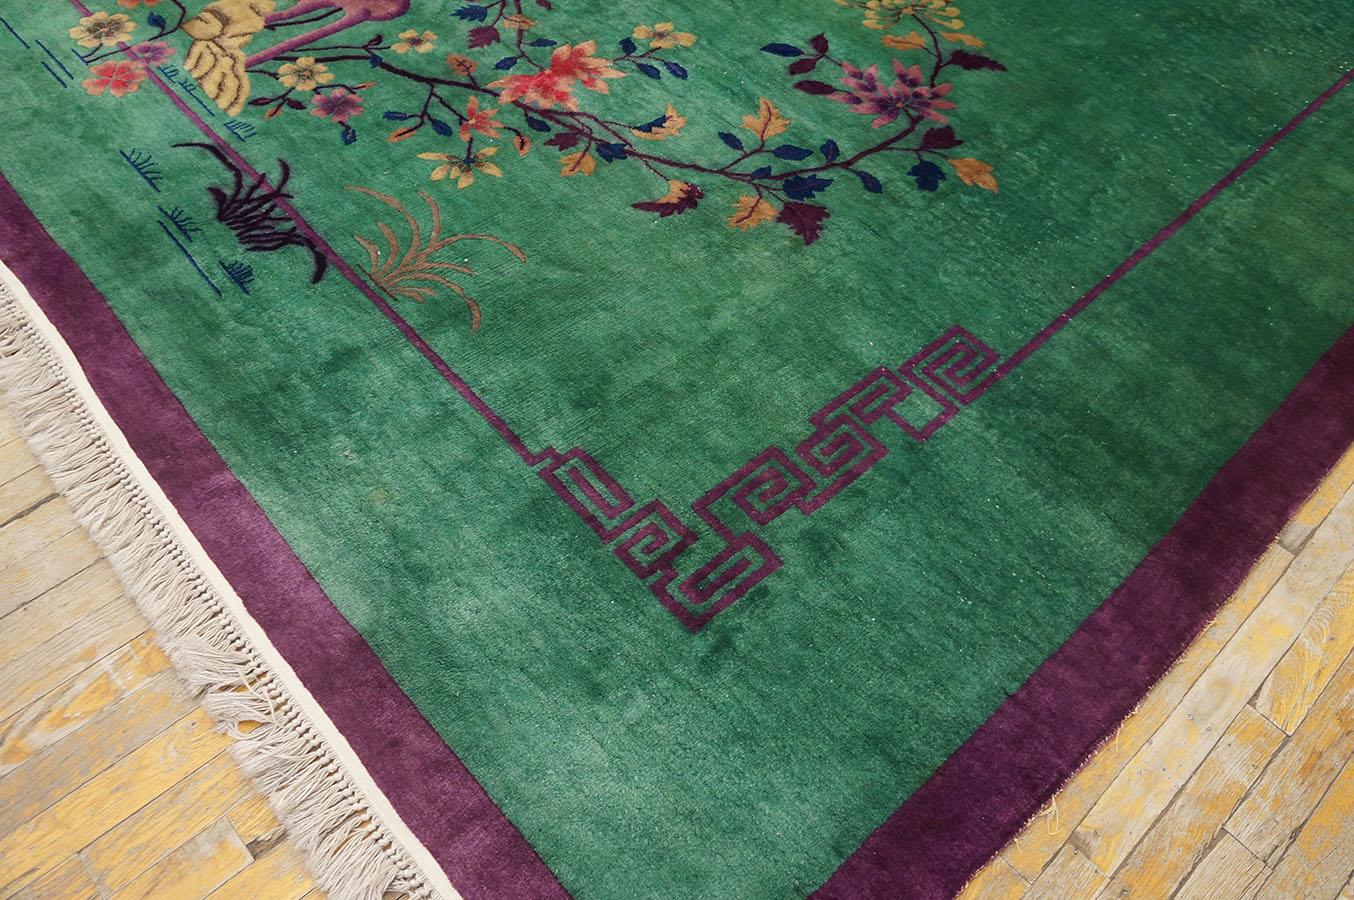 Hand-Knotted 1920s Chinese Art Deco Carpet ( 9' x 11' 8'' - 275 x 355 cm ) For Sale